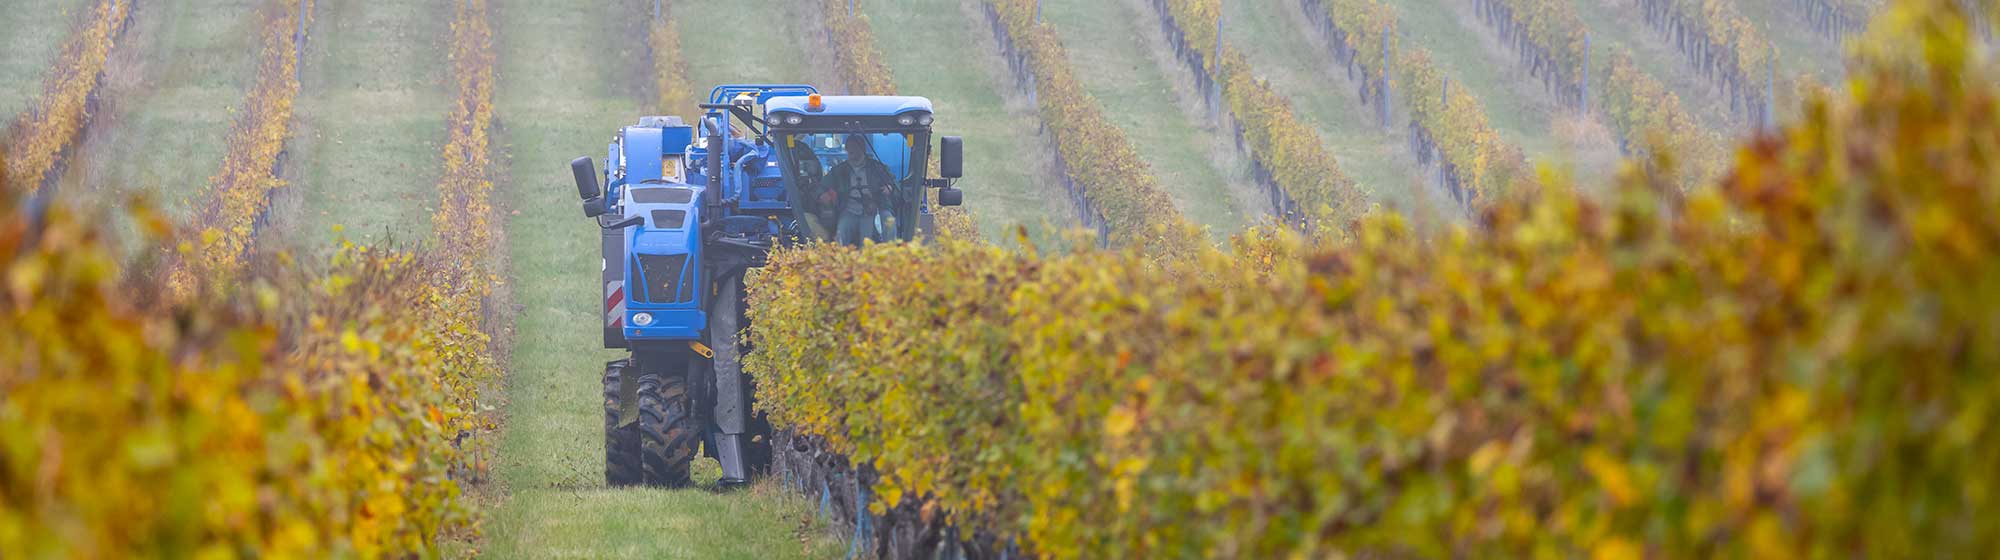 Tractor picking up grapes in a vineyard